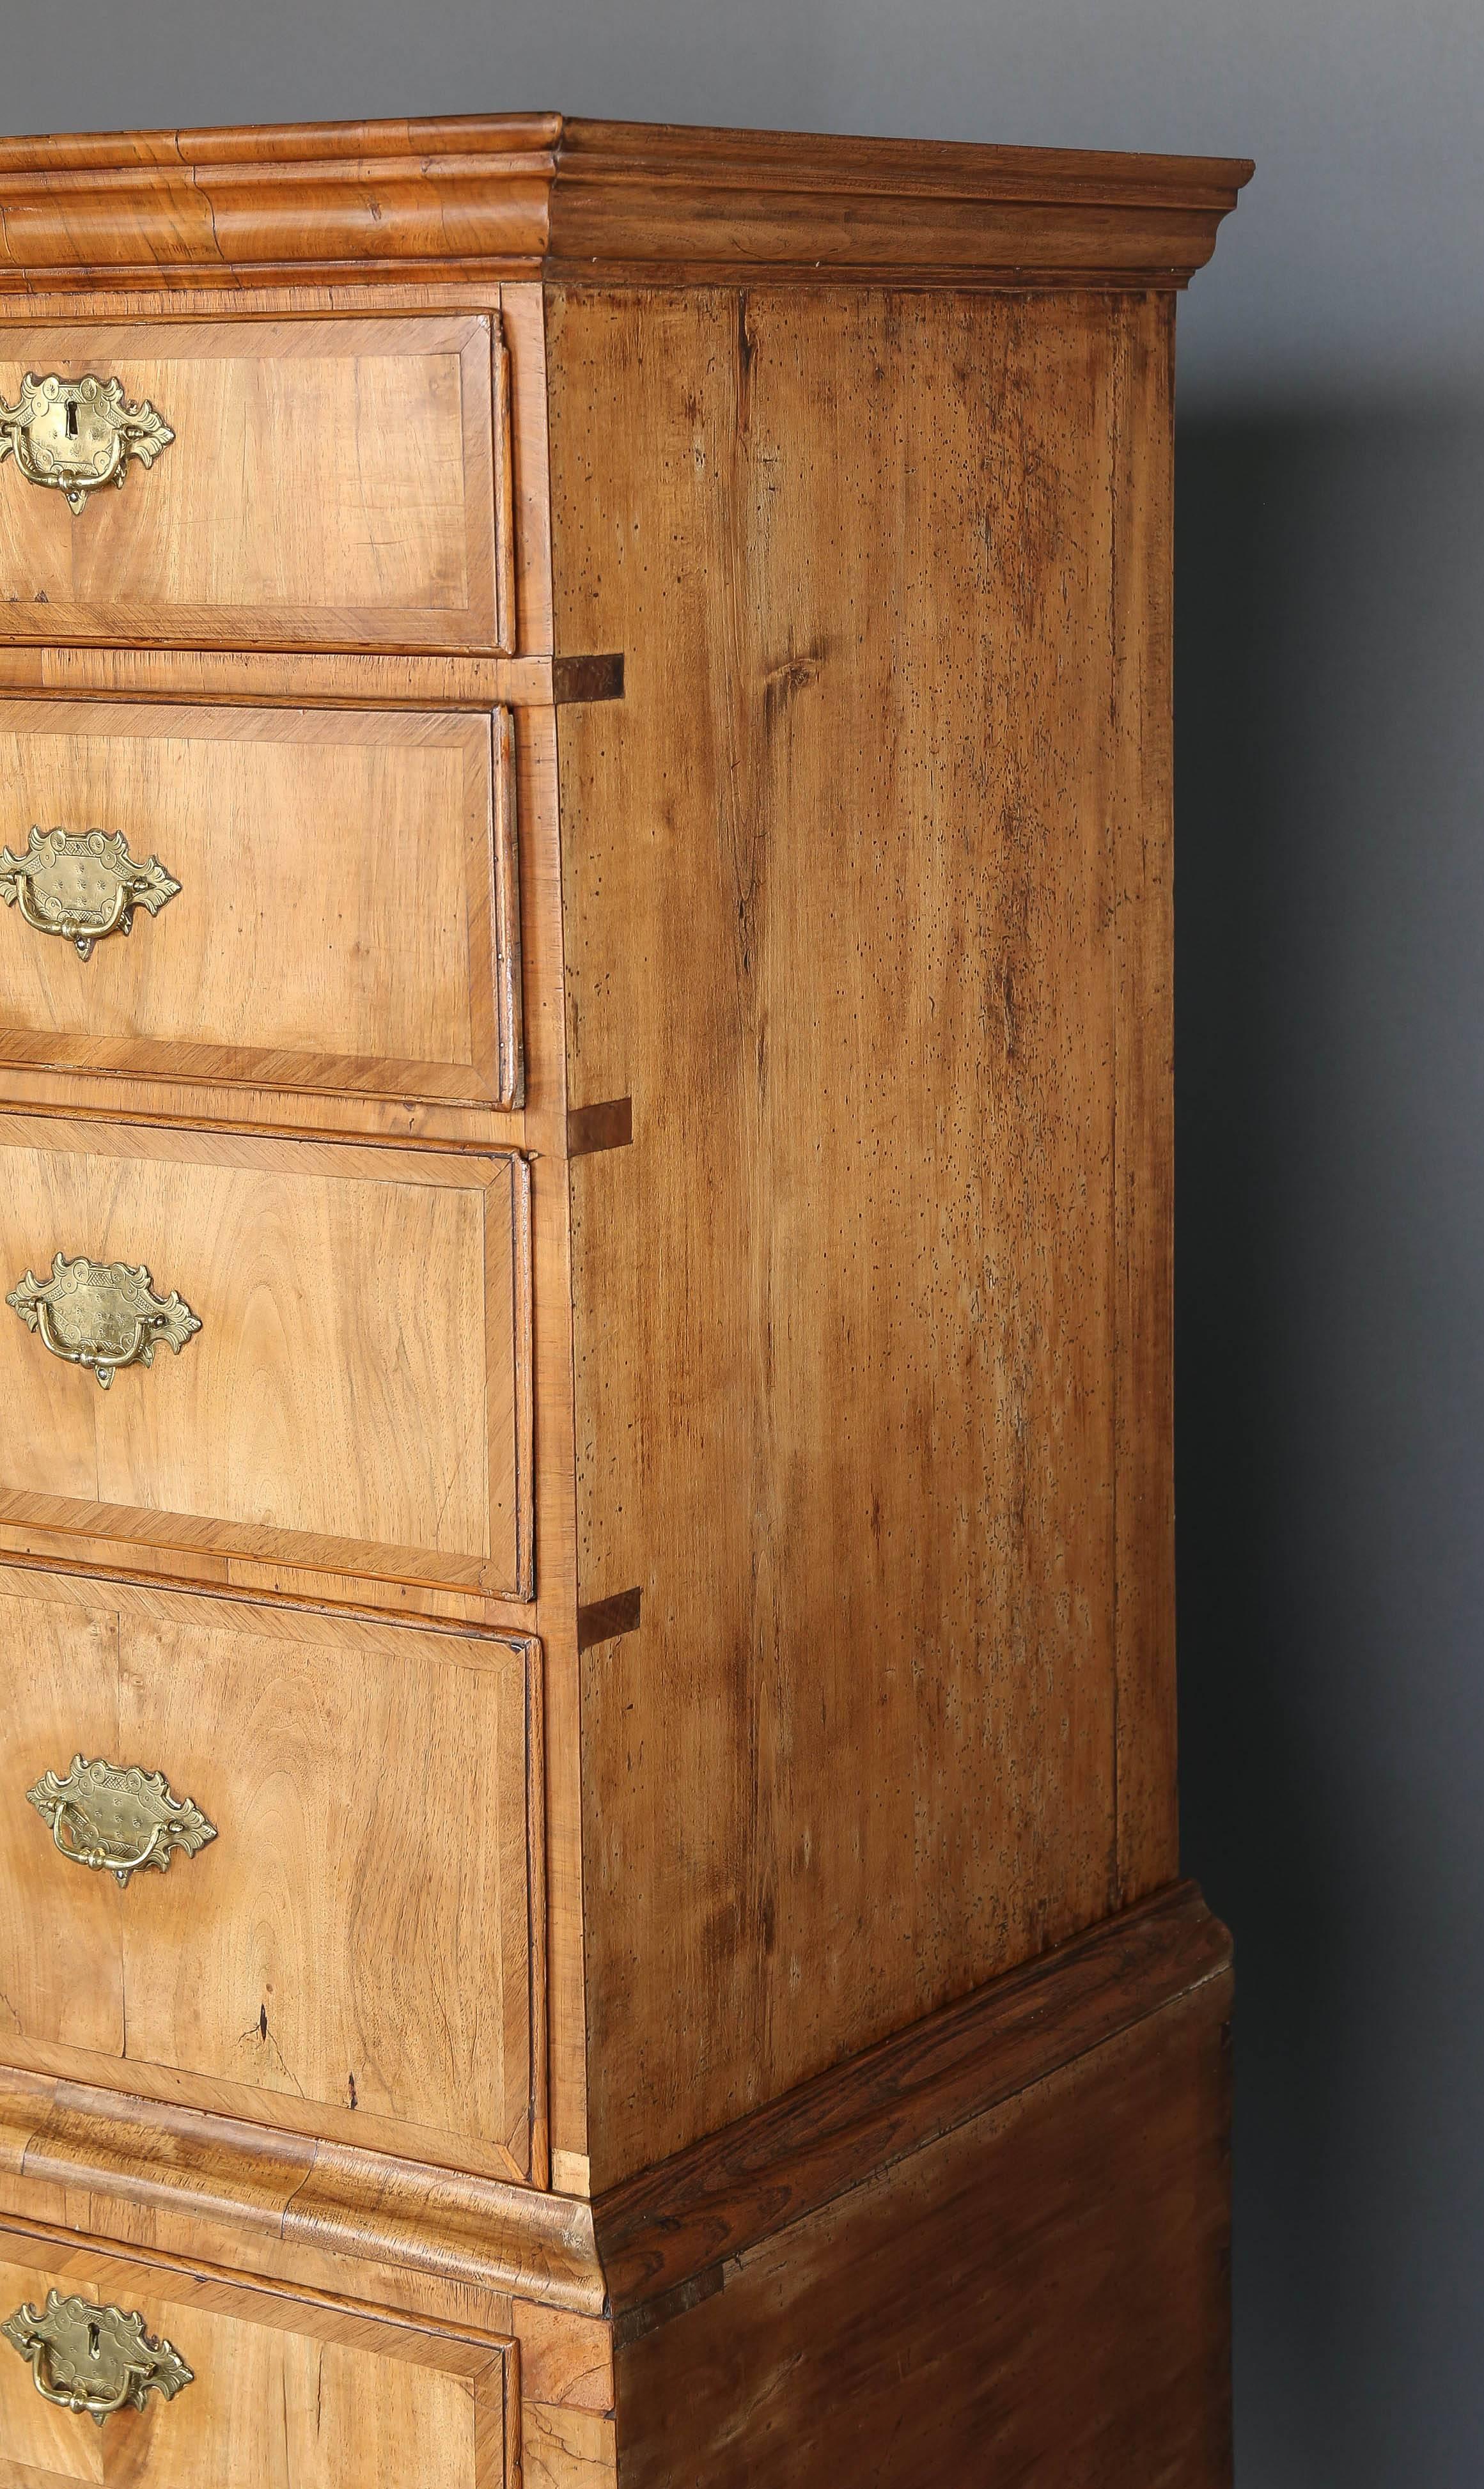 Sun bleached blond walnut 19th century highboy with original oak lined drawers and simple clean lines. Absolutely stunning piece with four short drawers and four long drawers. Often referred to as a chest on chest this piece would look beautiful